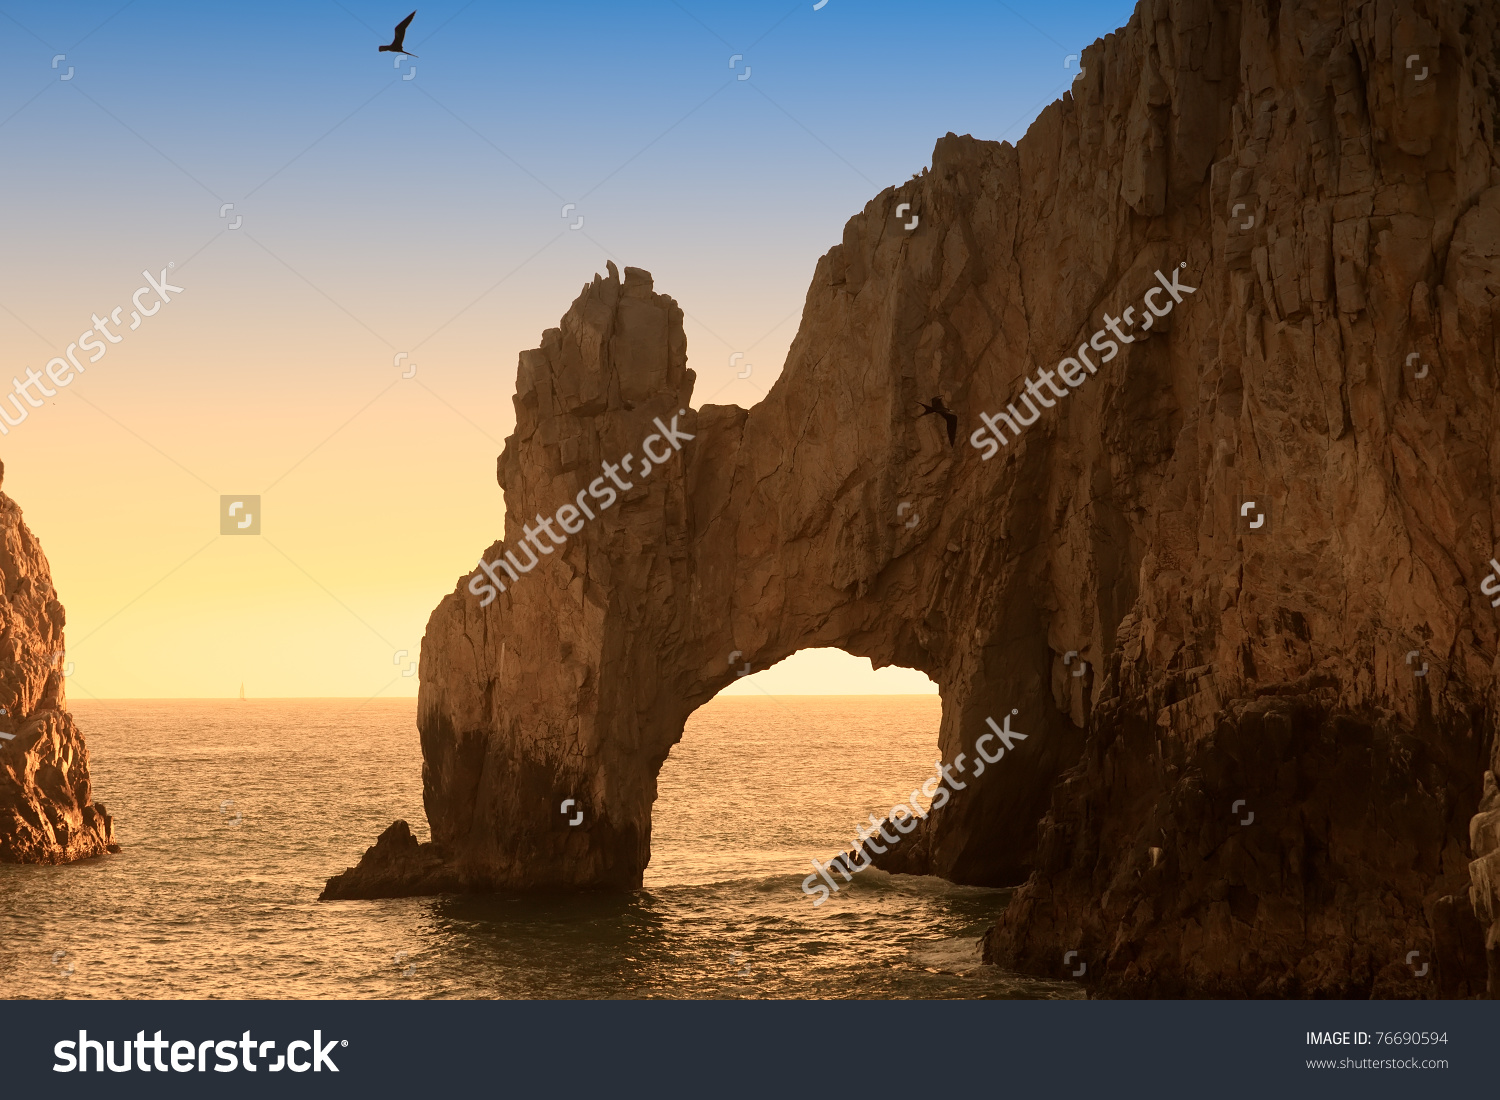 Cabo San Lucas clipart #1, Download drawings